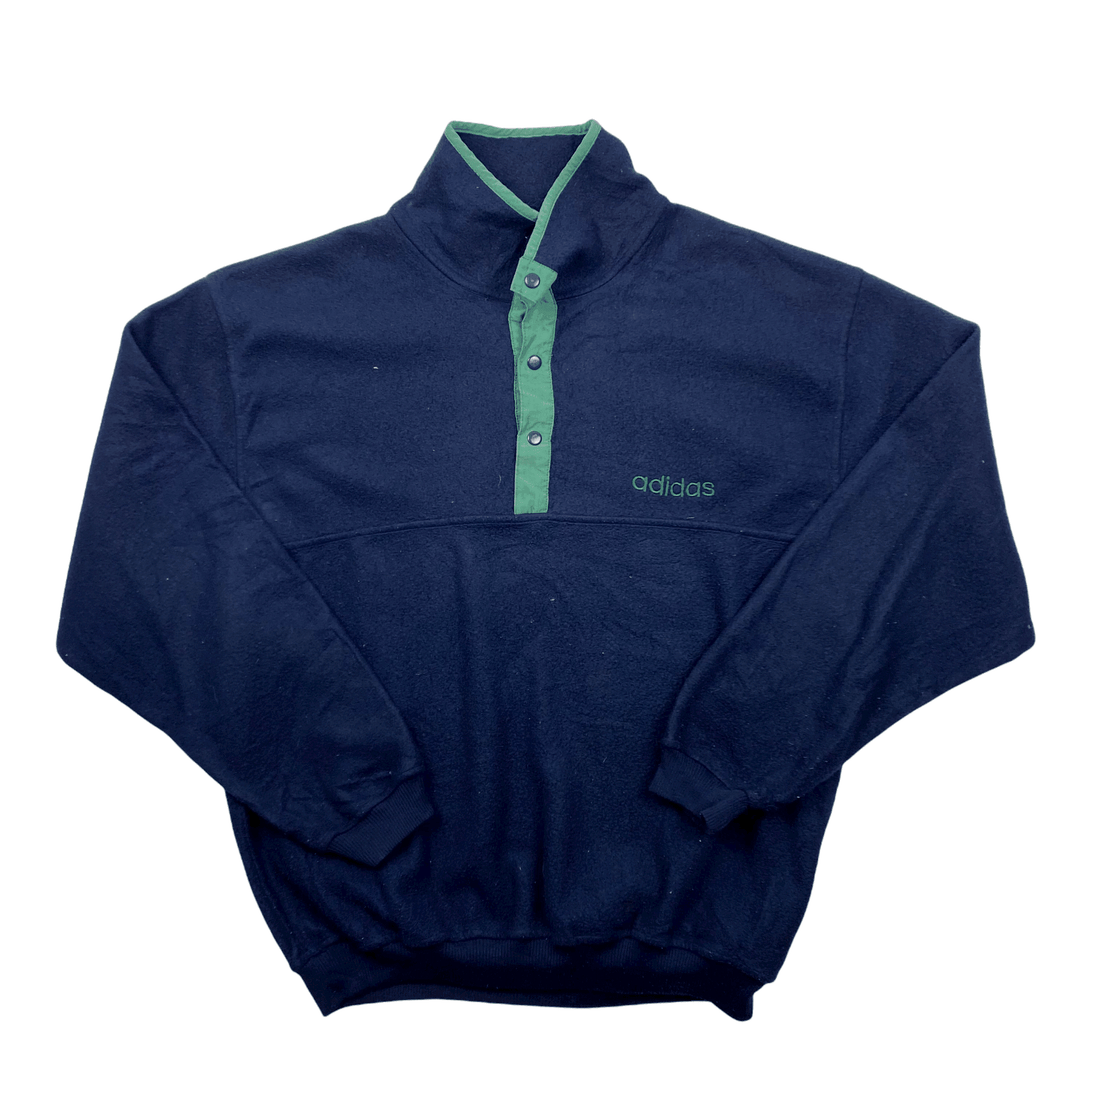 Vintage 90s Navy Blue Adidas Spell-Out Quarter Button Fleece - Large - The Streetwear Studio